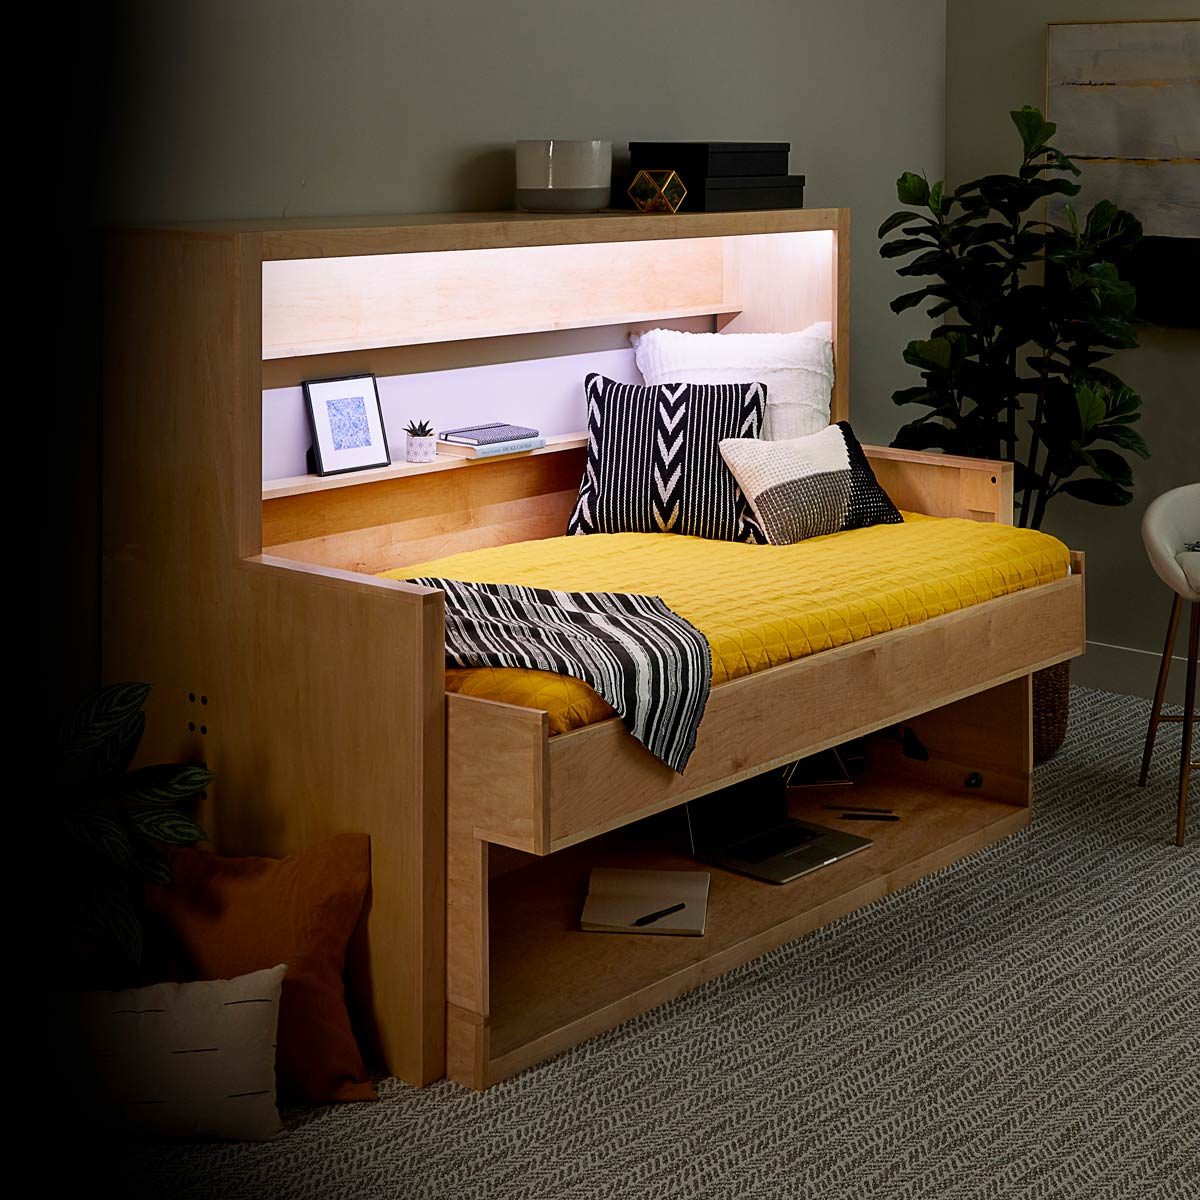 How To Build A Murphy Bed That Easily Transforms Into A Desk Diy Family Handyman